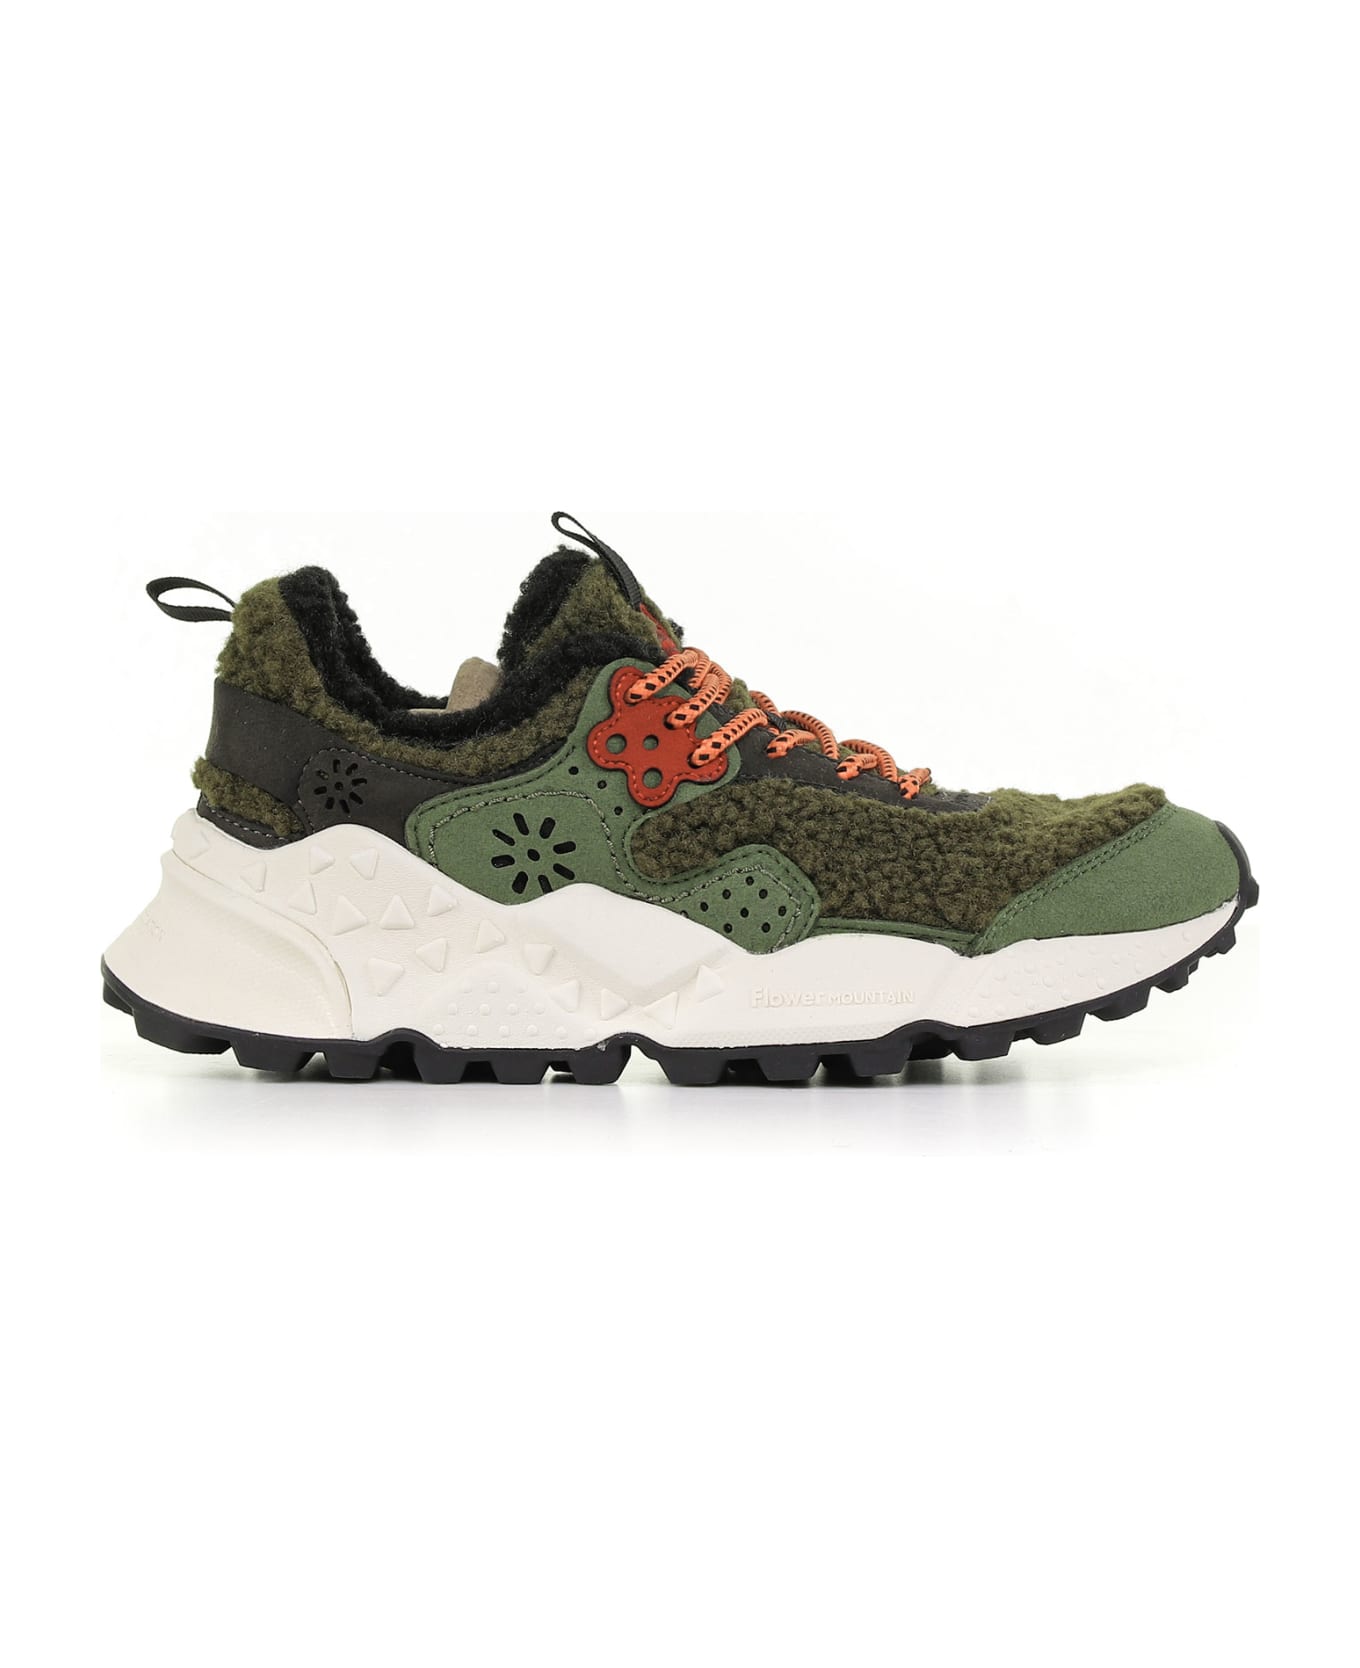 Flower Mountain Suede And Fabric Sneakers - MILITARE スニーカー